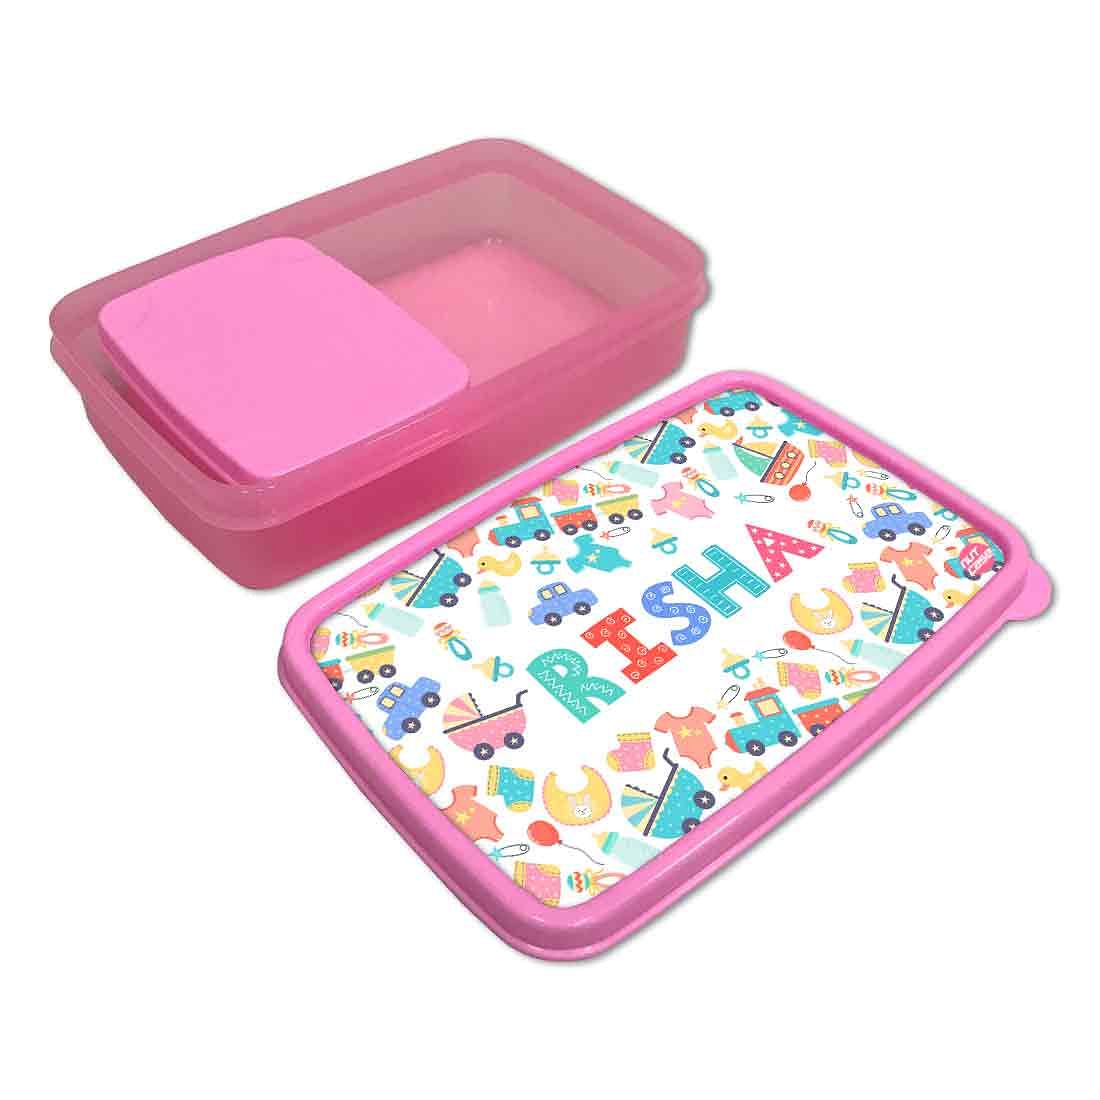 Personalized Snack Box for Kids Plastic Lunch Box for Girls -Kids Toy Nutcase